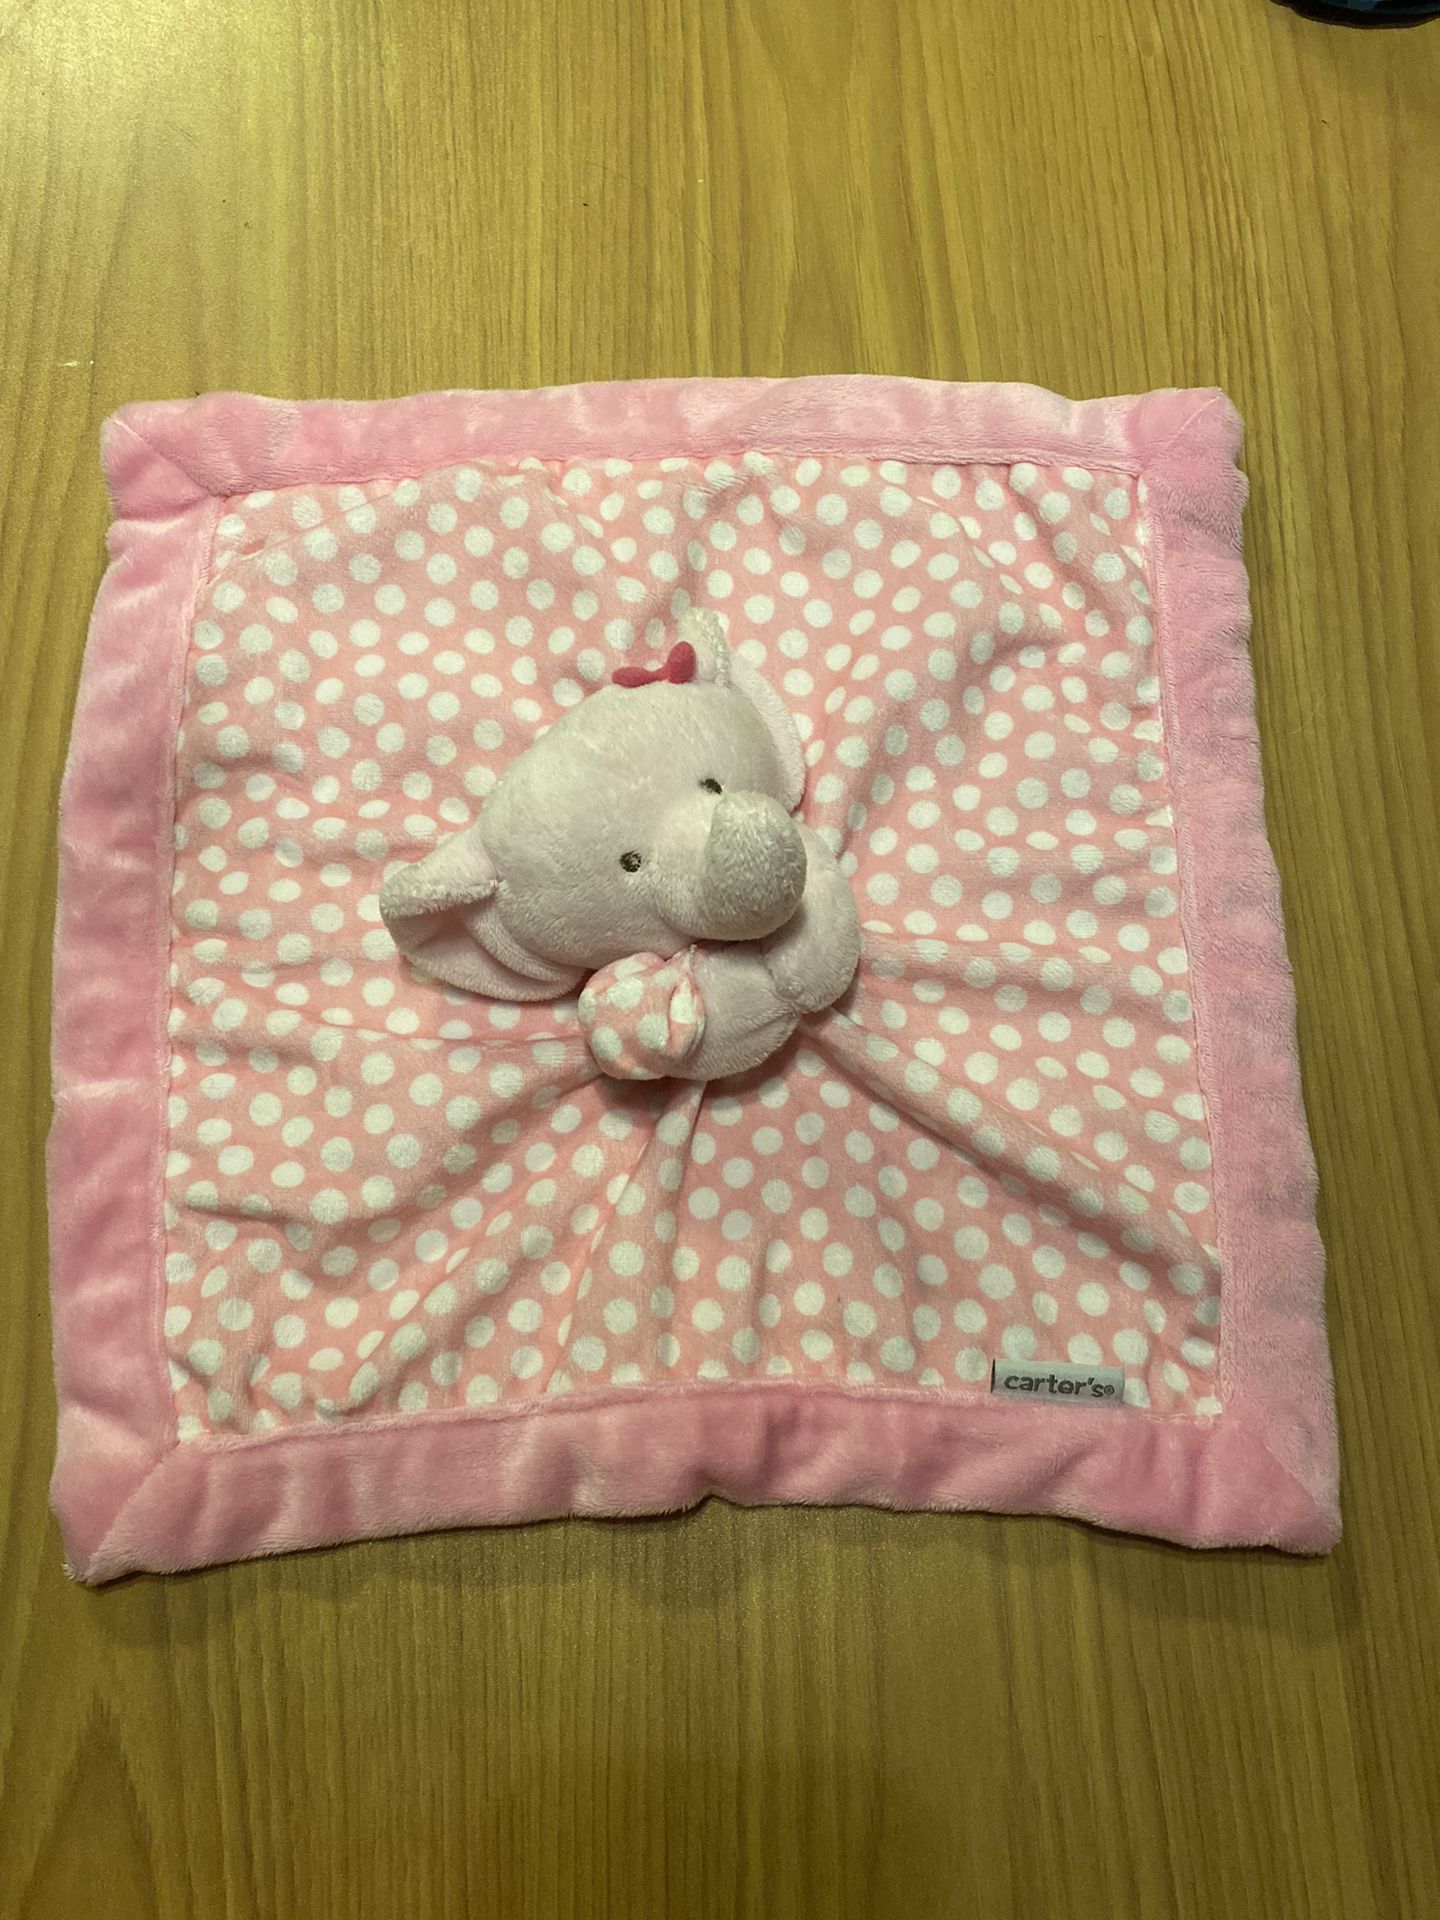 Carter's Pink Elephant Lovey Security Blanket  Bow  White Polka Dots  14"